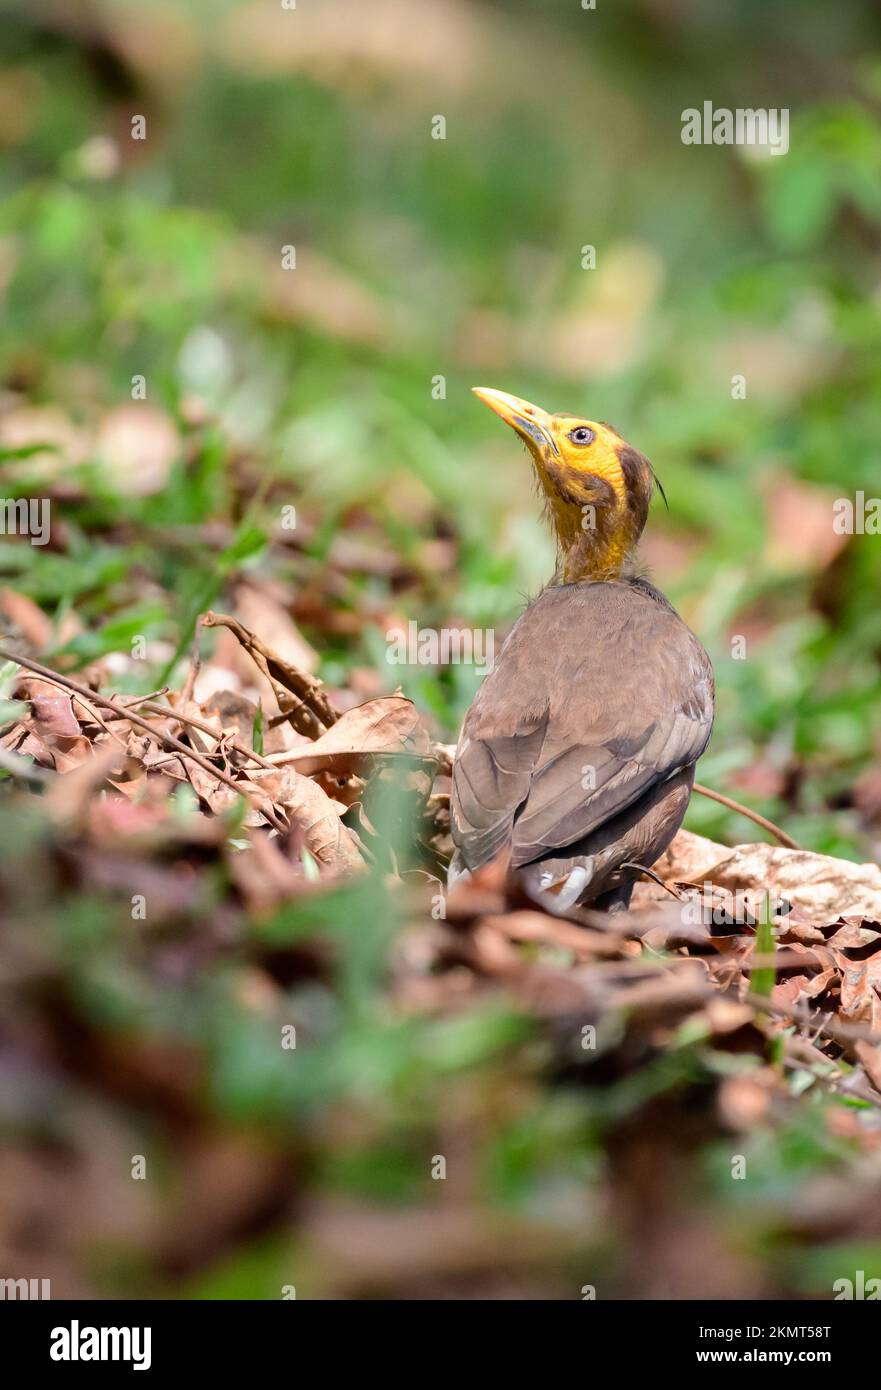 Sick myna bird suffering from a disease. Lost feathers on the neck and its head due to illness. Stock Photo